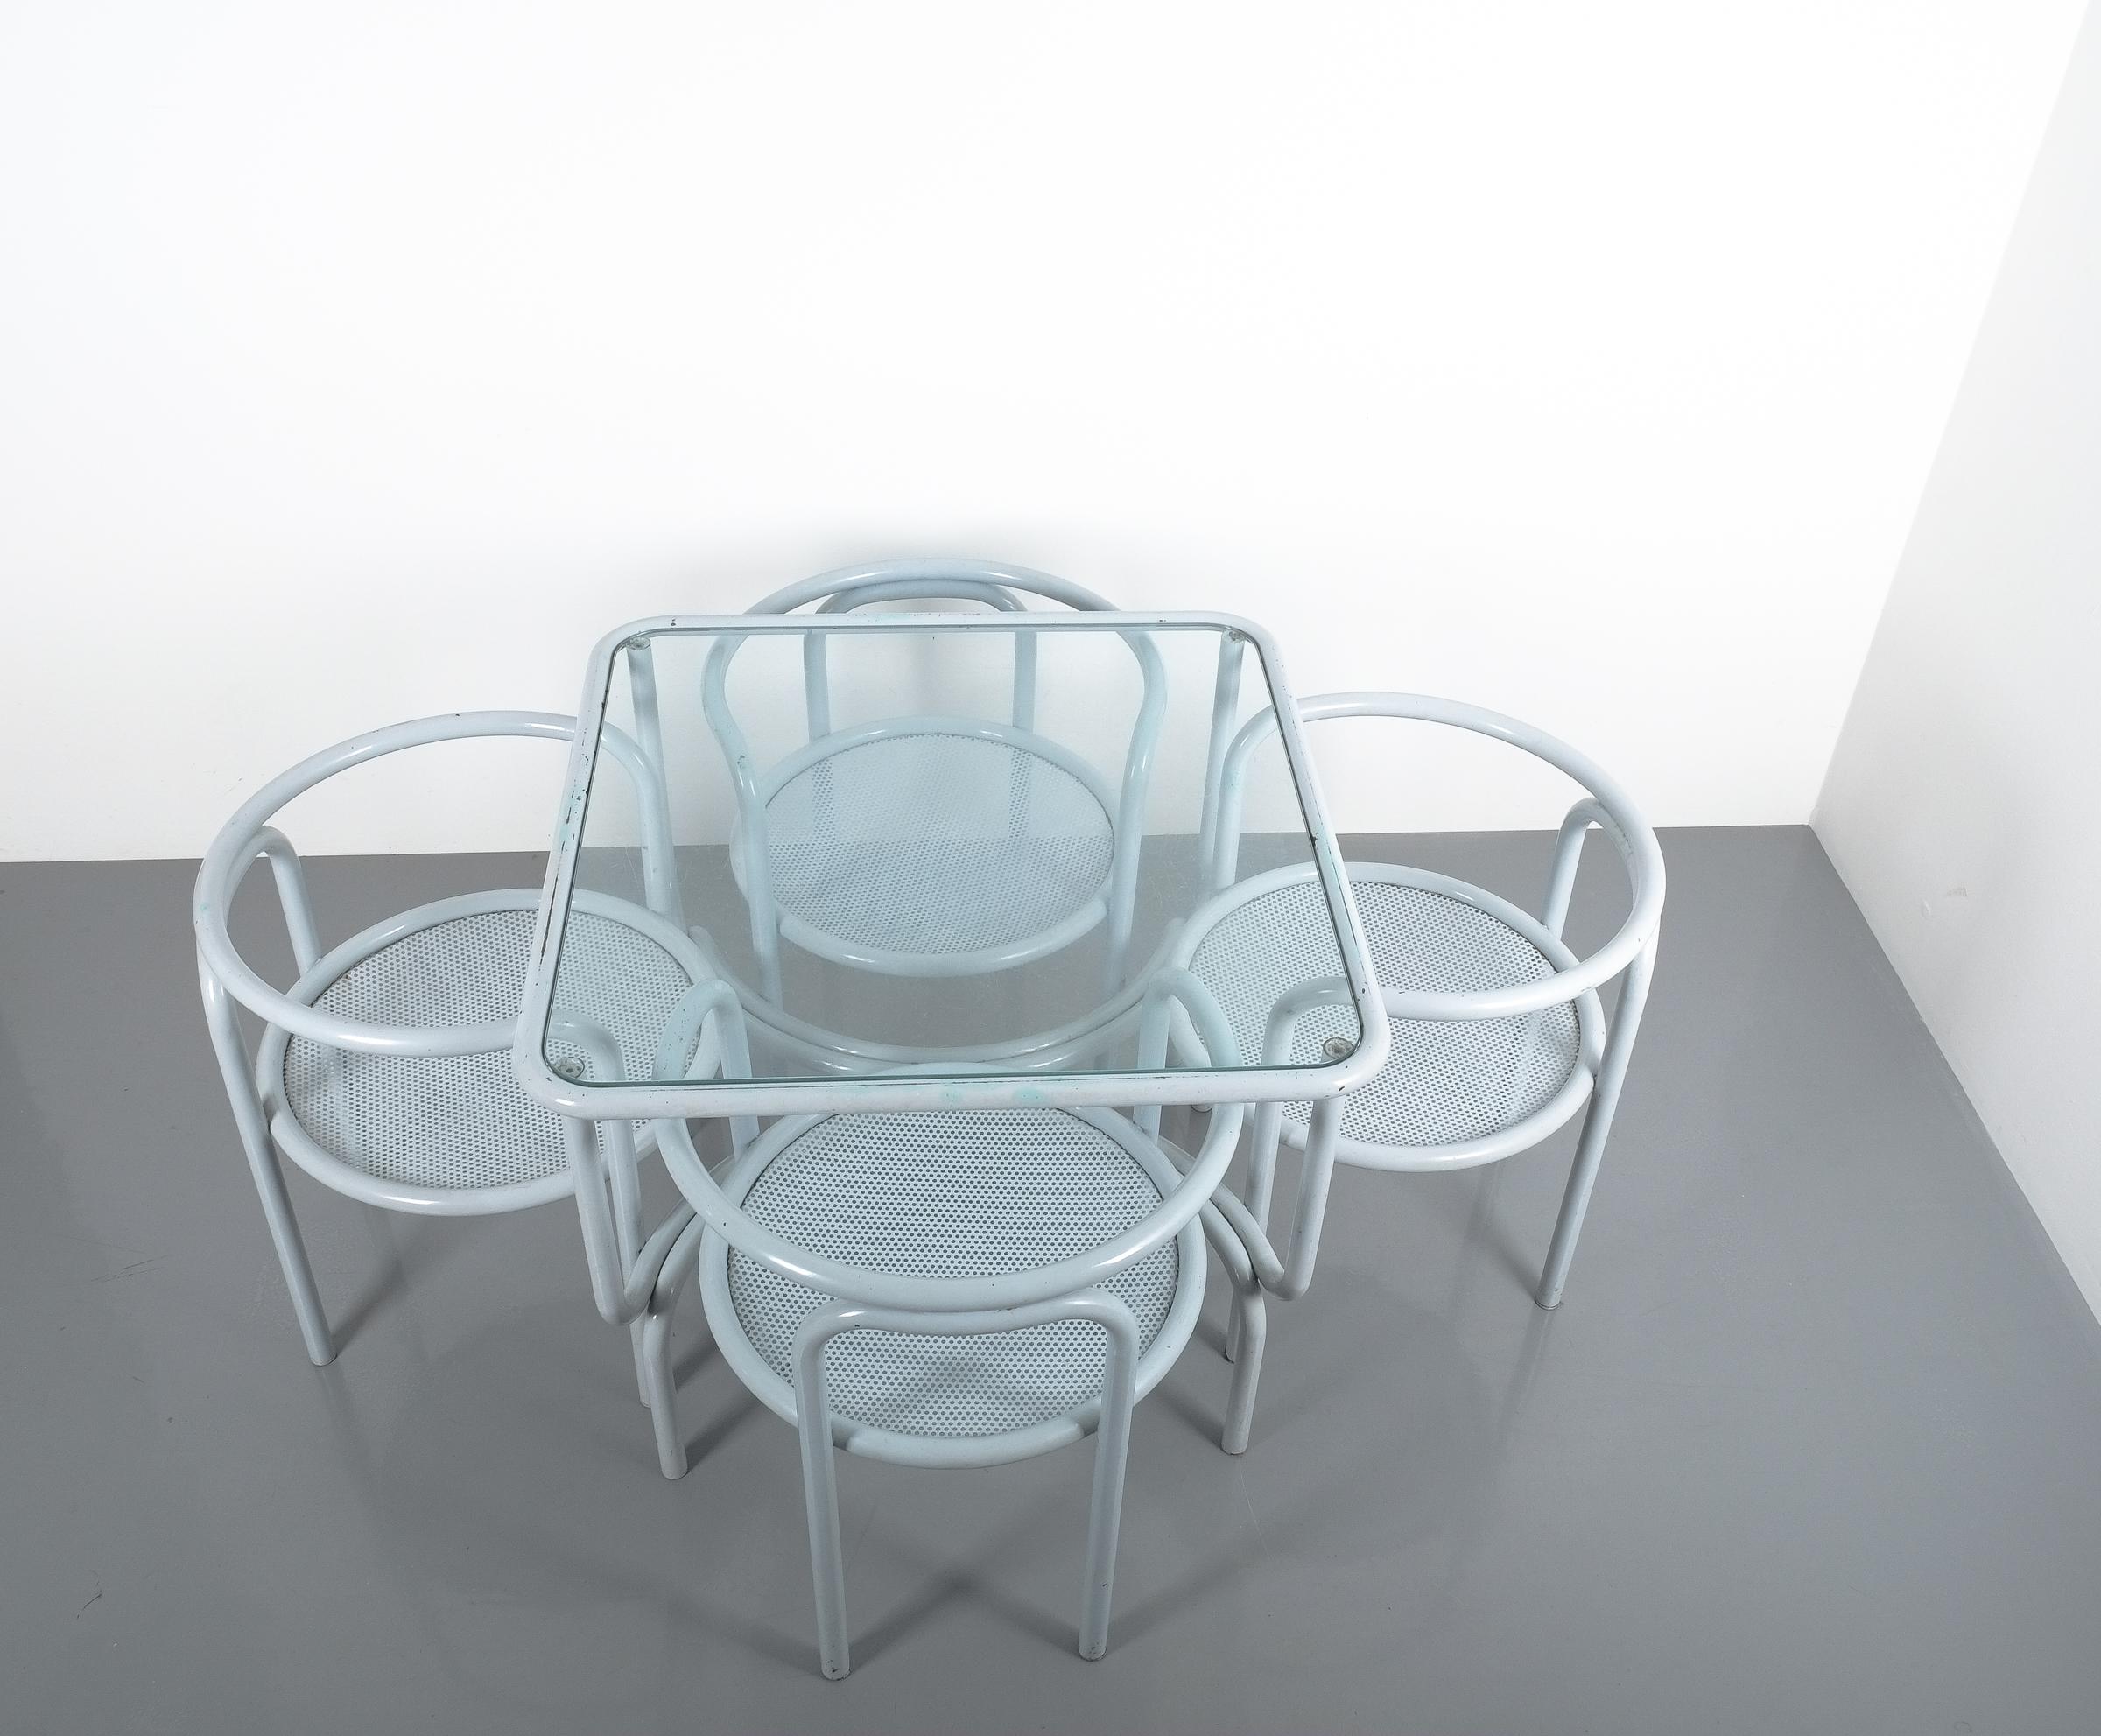 Gae Aulenti set of garden furniture metal grey locus solos midcentury. Nice set of 4 chairs and a table with original glass tabletop. Fair to good original condition, some parts show loss of color and stains of rust. The glass shows scratches and